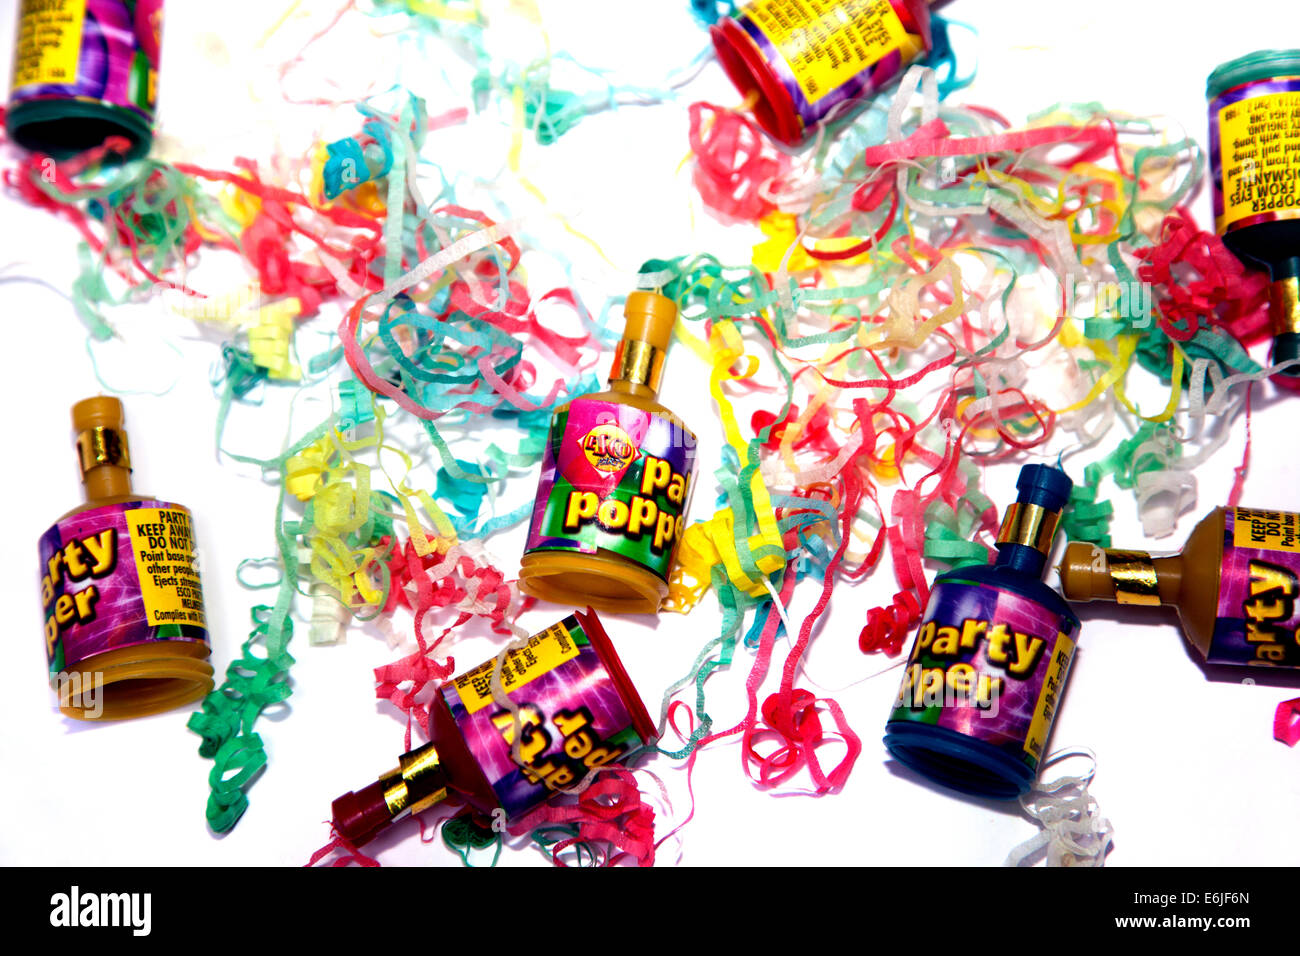 Party poppers, London Stock Photo